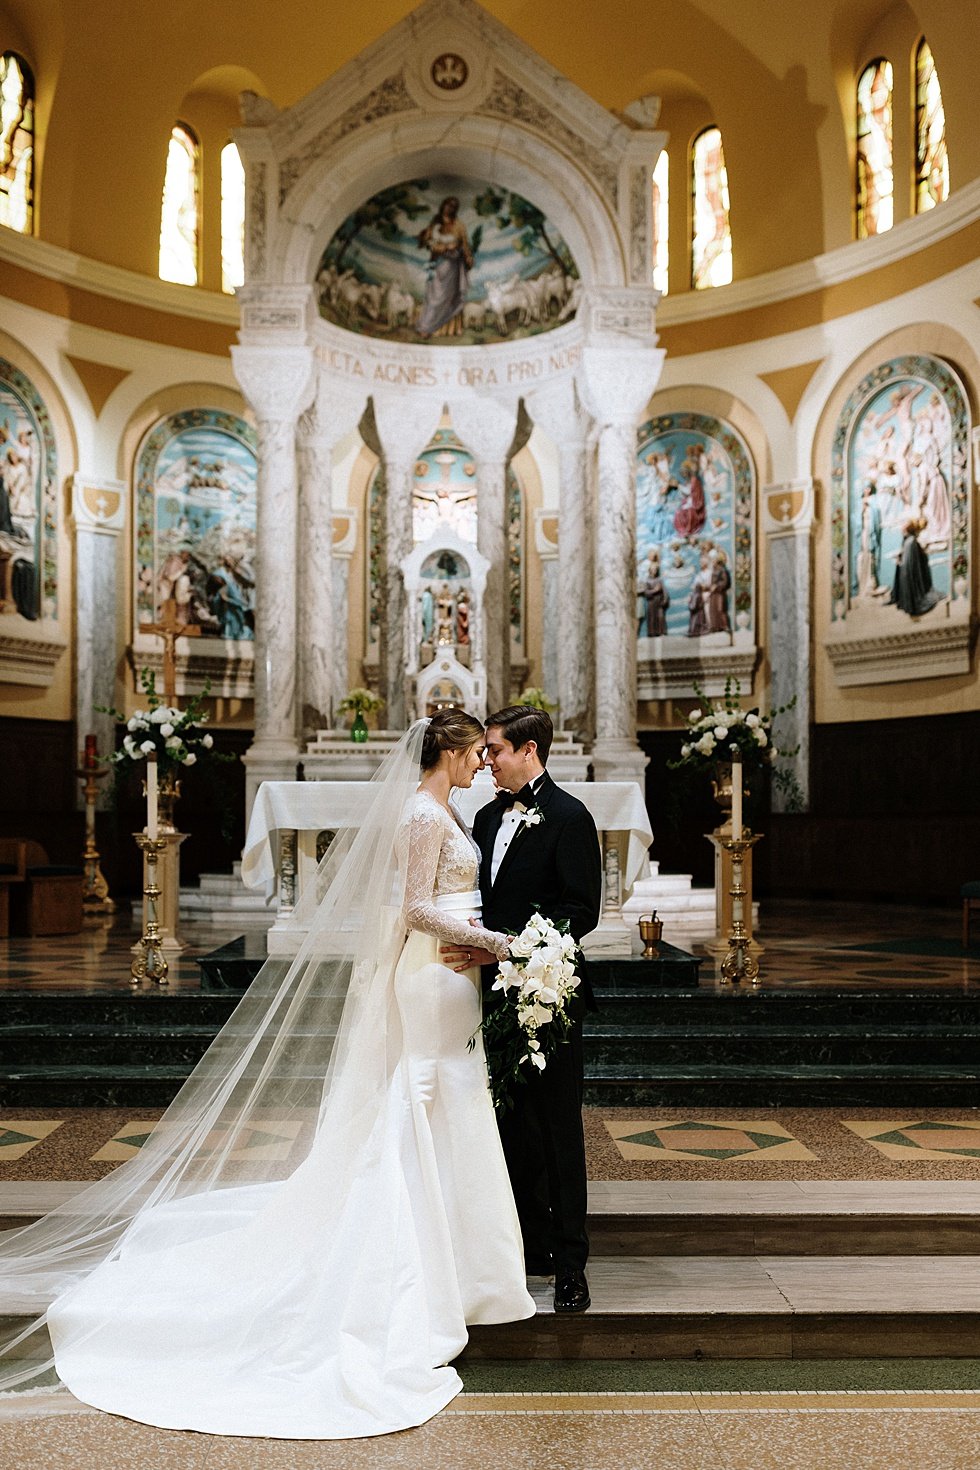  Bride and groom portrait at St Agnes Catholic Curuch. Lauren and Adam's winter wedding at St Agnes Catholic church and the Frazier History Museum. 